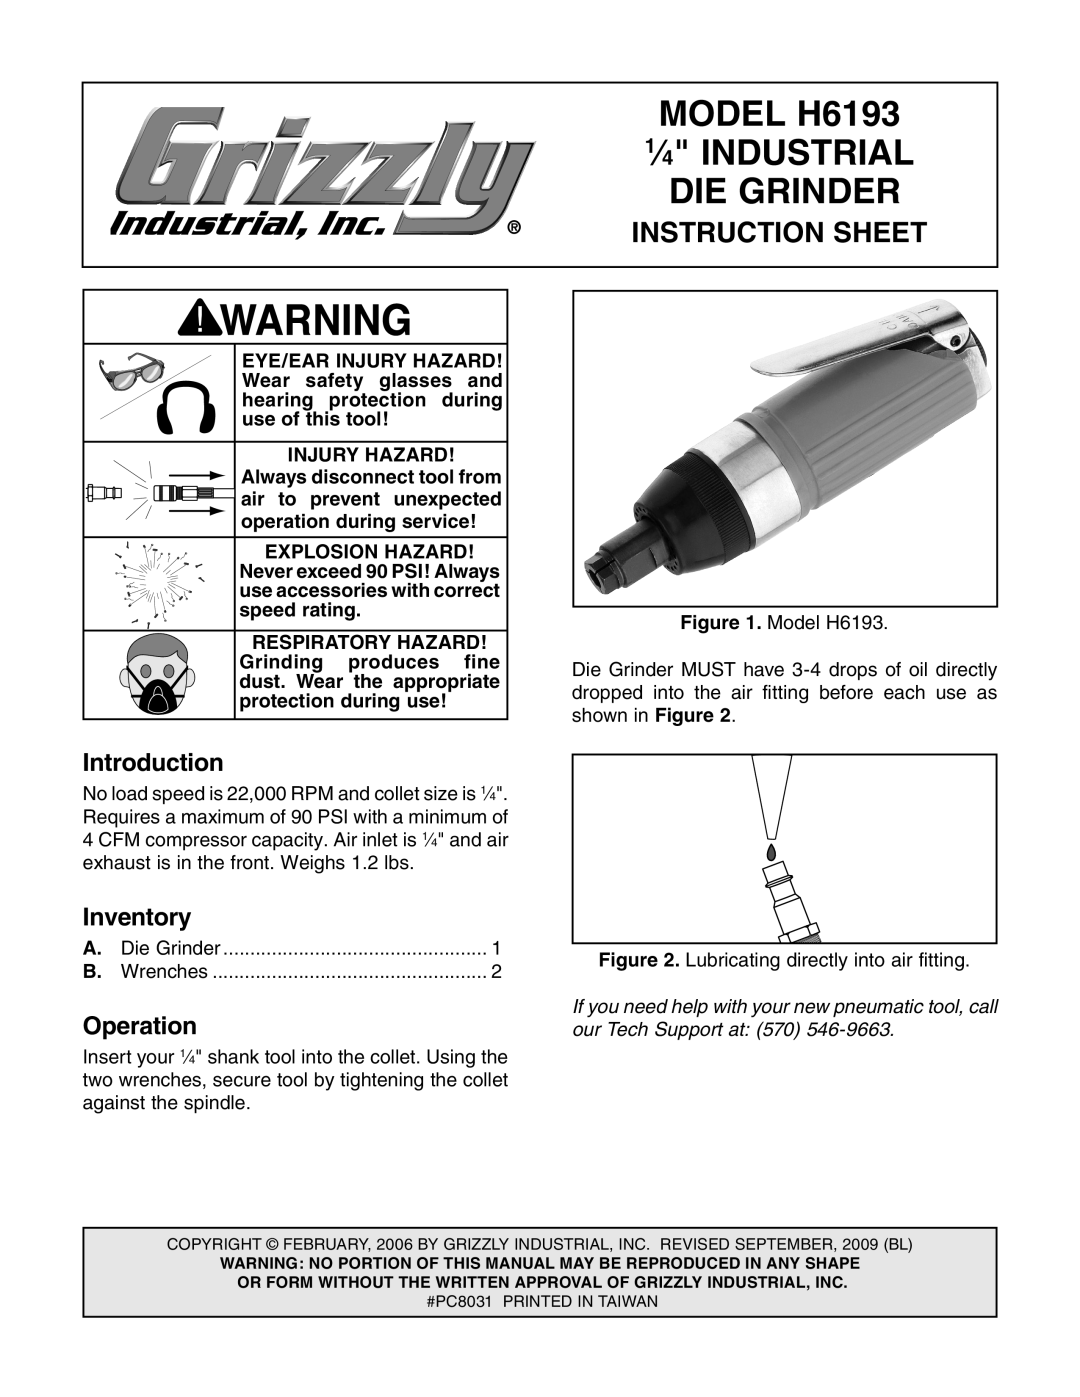 Grizzly instruction sheet MODEL H6193, 1⁄4 INDUSTRIAL, Die Grinder, Instruction Sheet, Introduction, Inventory 